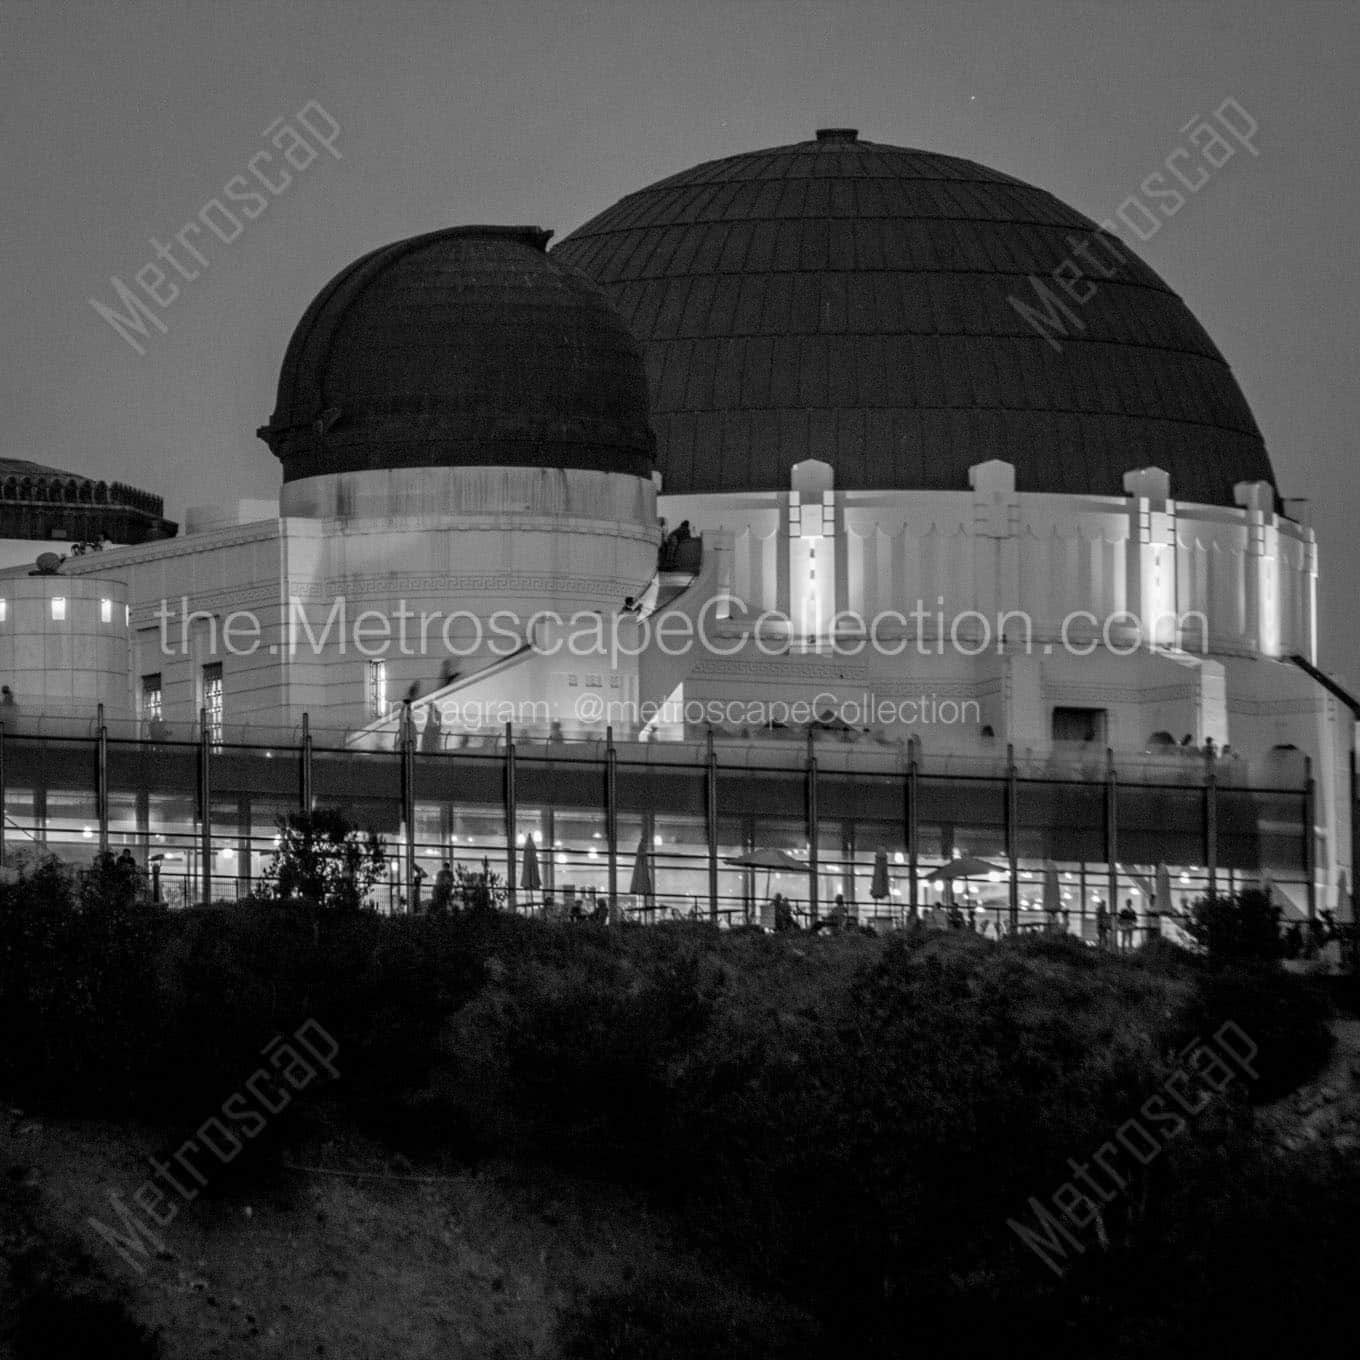 griffith observatory at night Black & White Wall Art